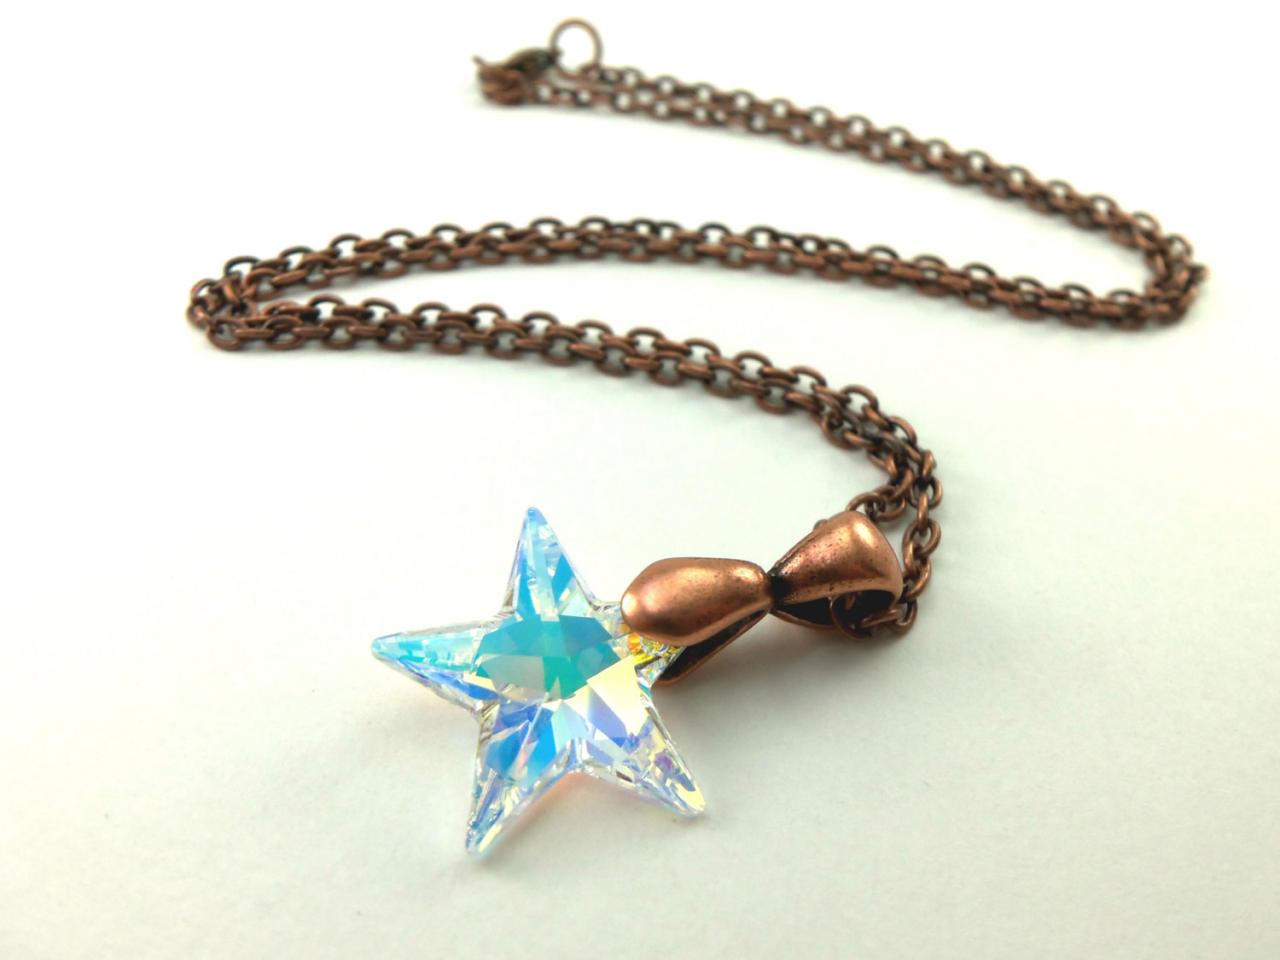 Crystal Star Necklace Copper Jewelry Beaded Galaxy Necklace Astral Star Jewelry Copper Necklace